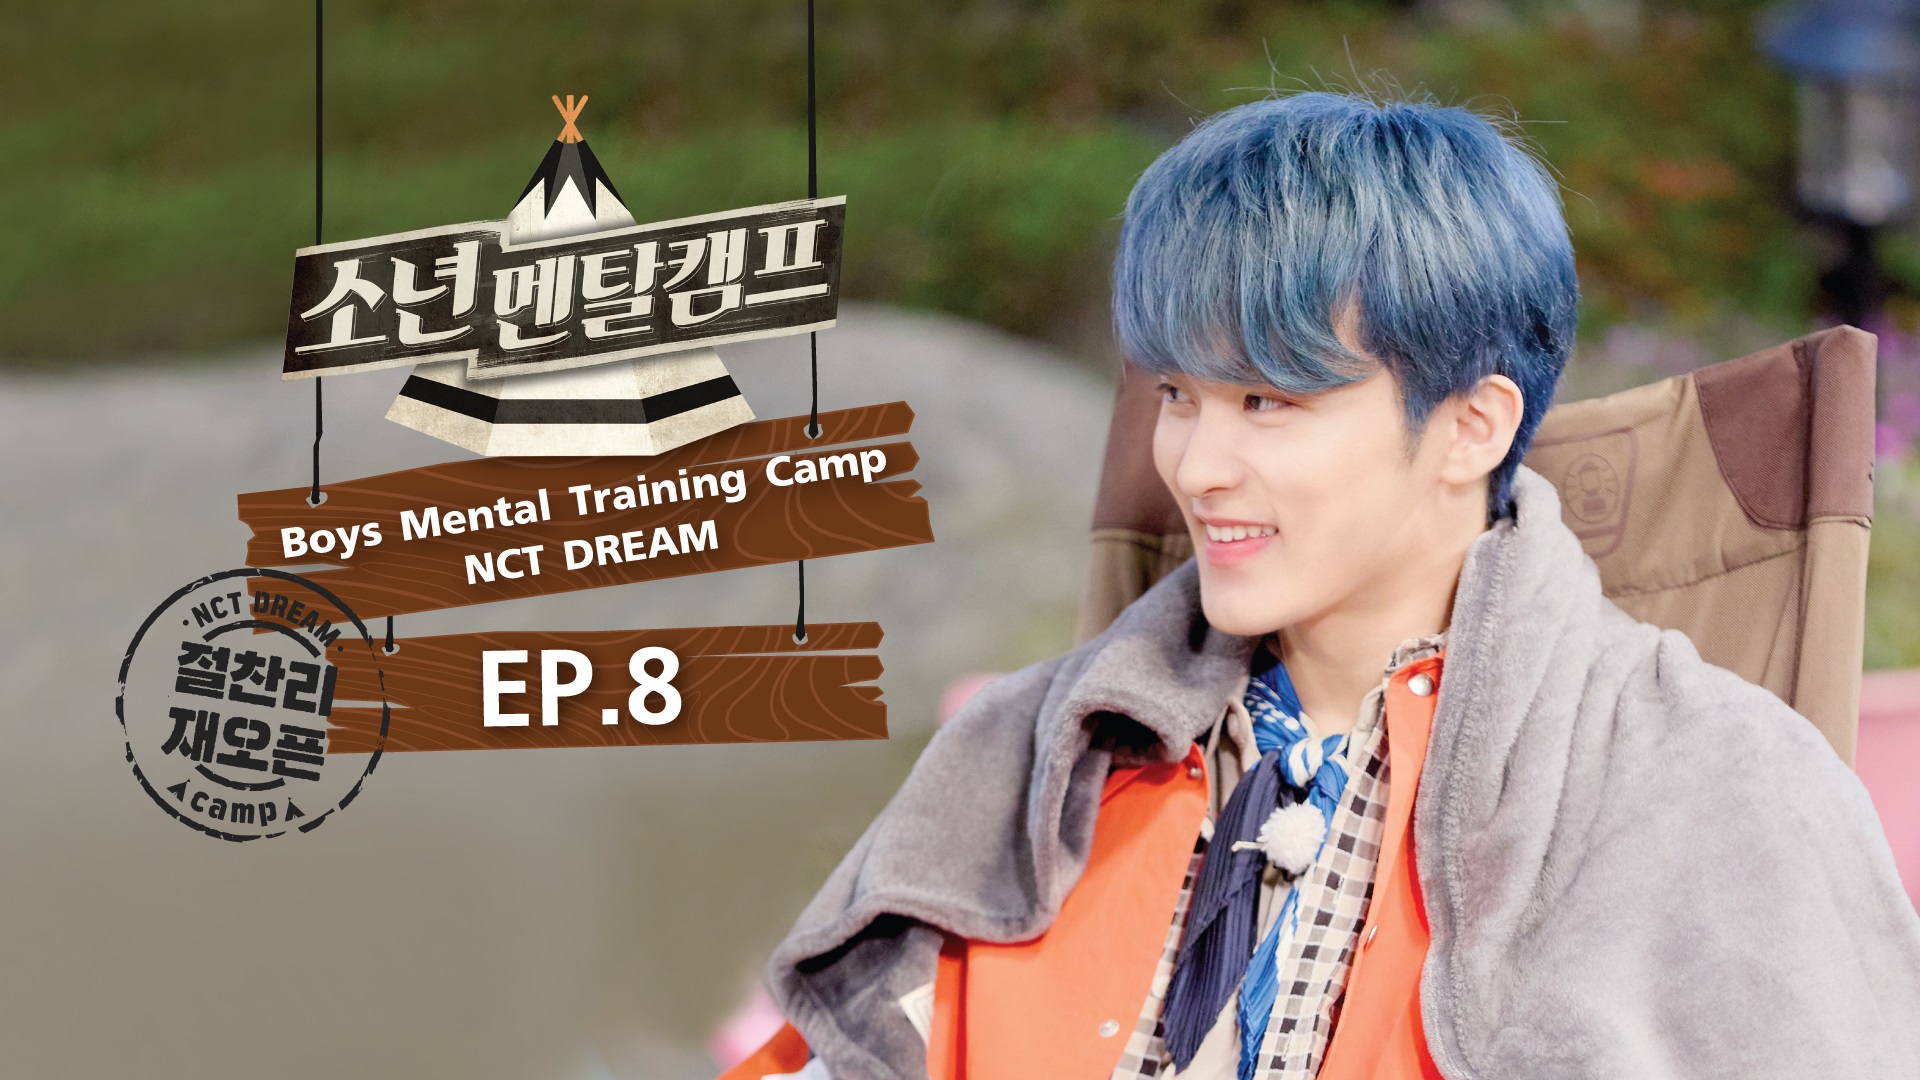 Dream ep 5 nct sub camp mental eng huangsfjswnls